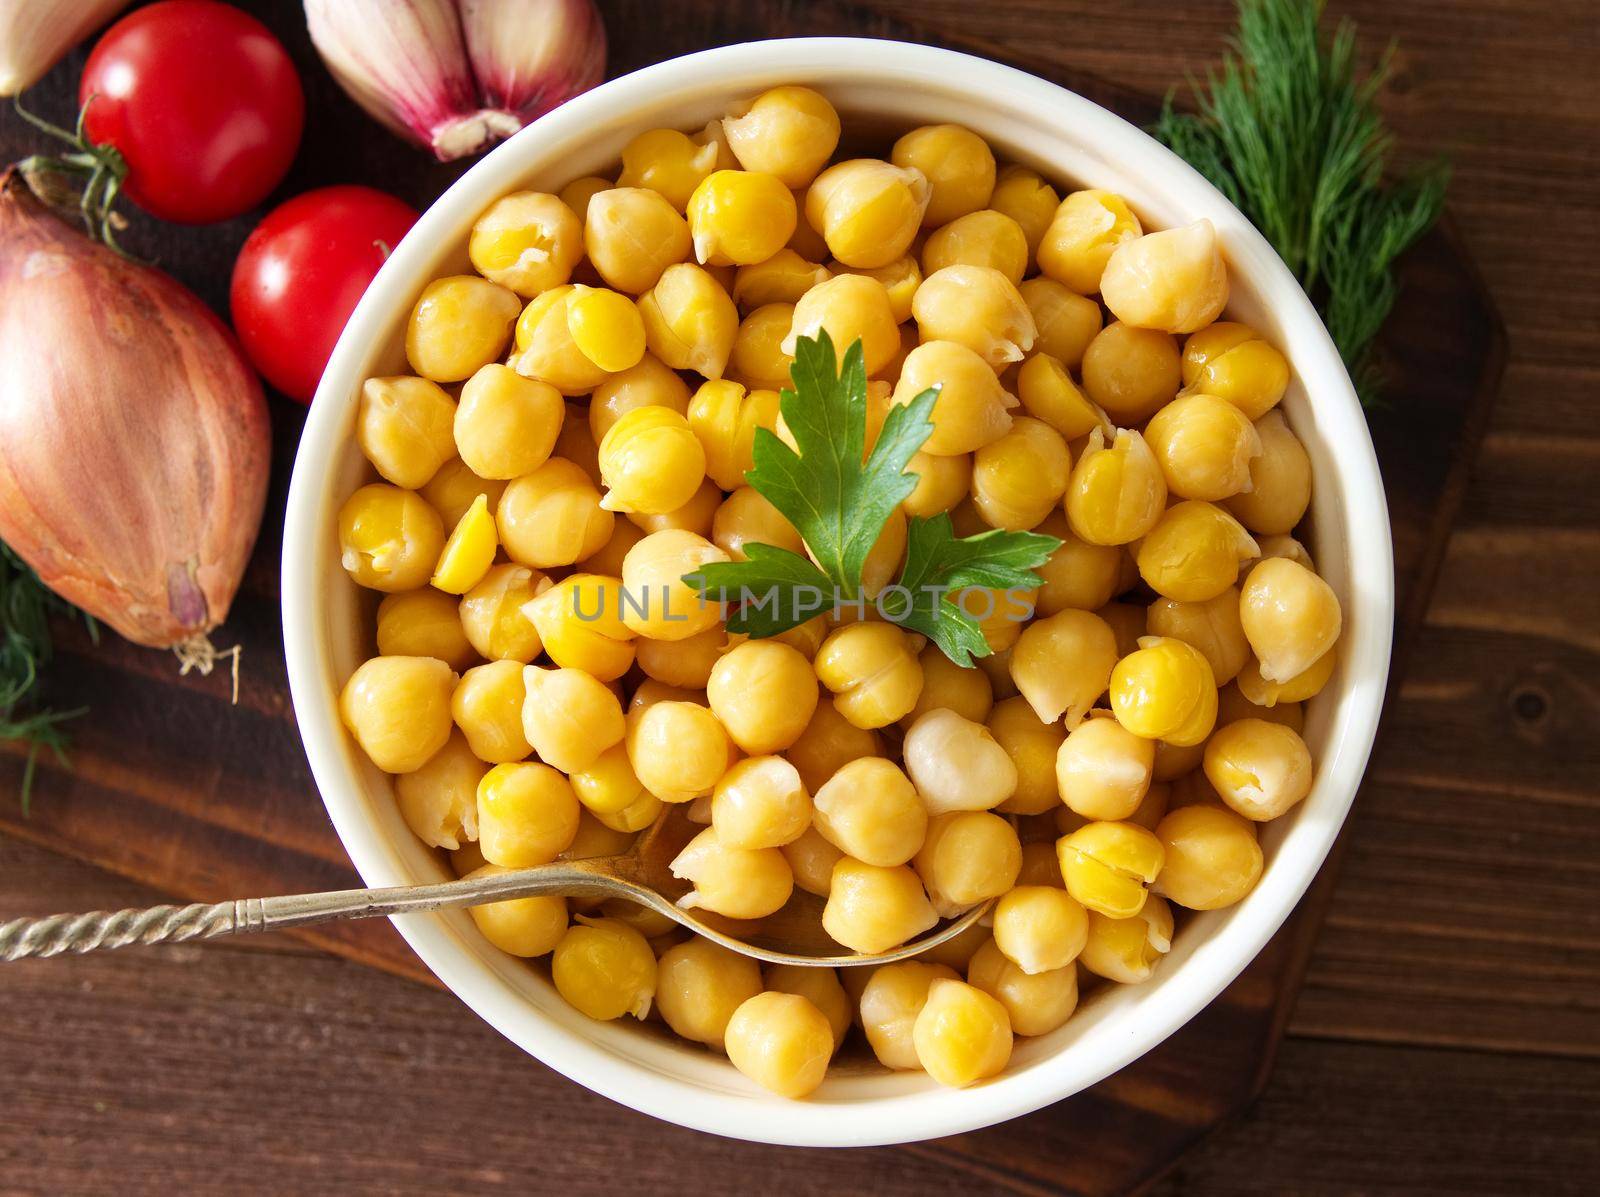 Cooked Chickpeas on bowl on dark wooden table. Healthy, vegetarian nutritious protein food by NataBene